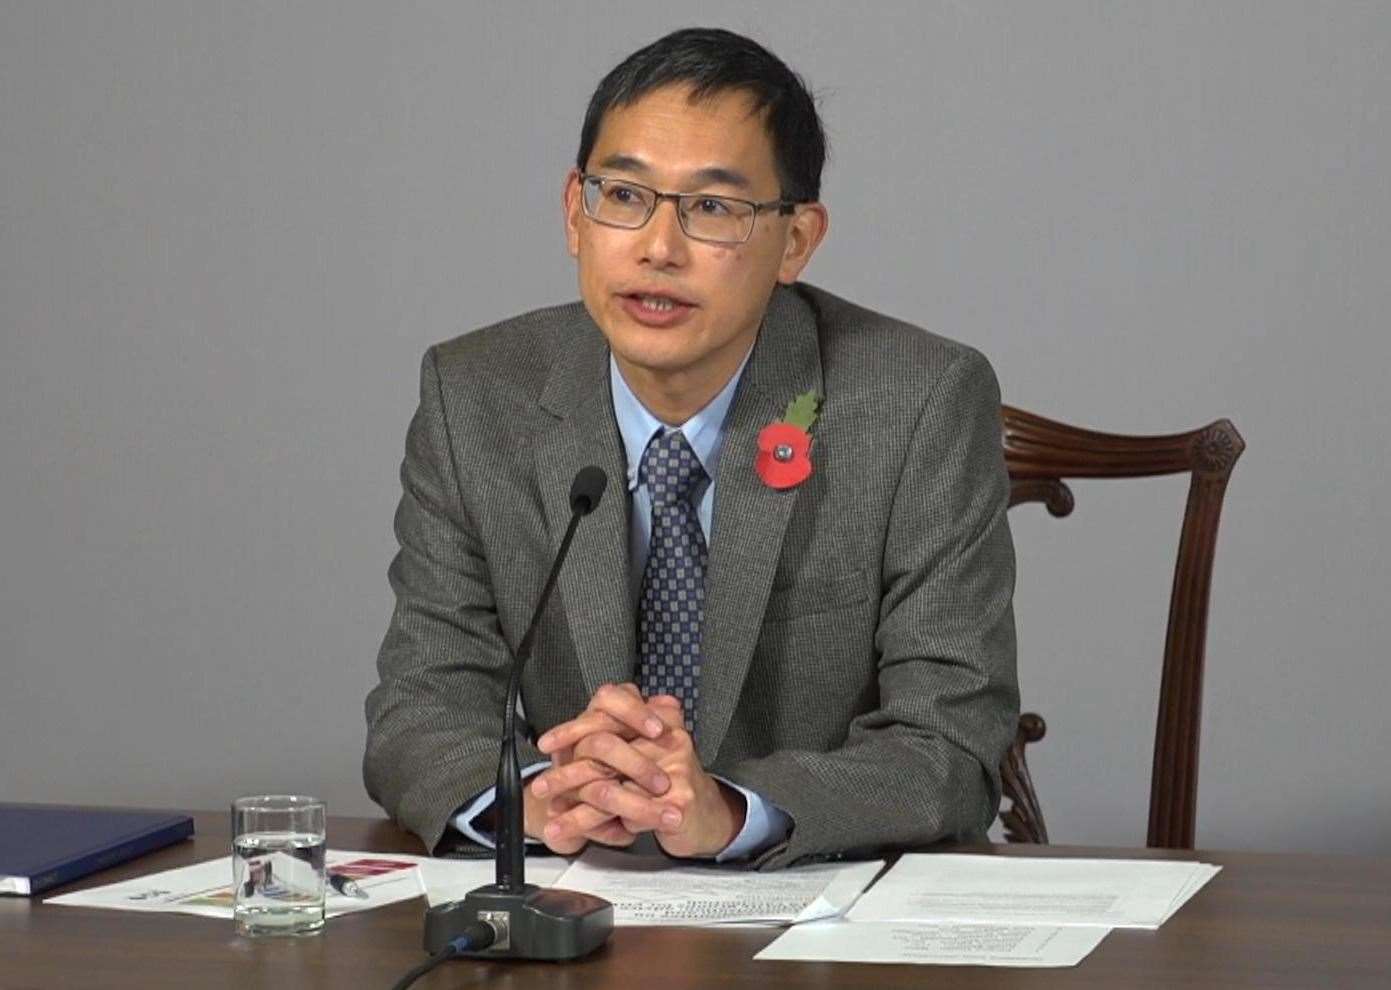 Prof Wei Shen Lim, chair of joint committee on vaccination and immunisation Covid-19 vaccine sub-comittee